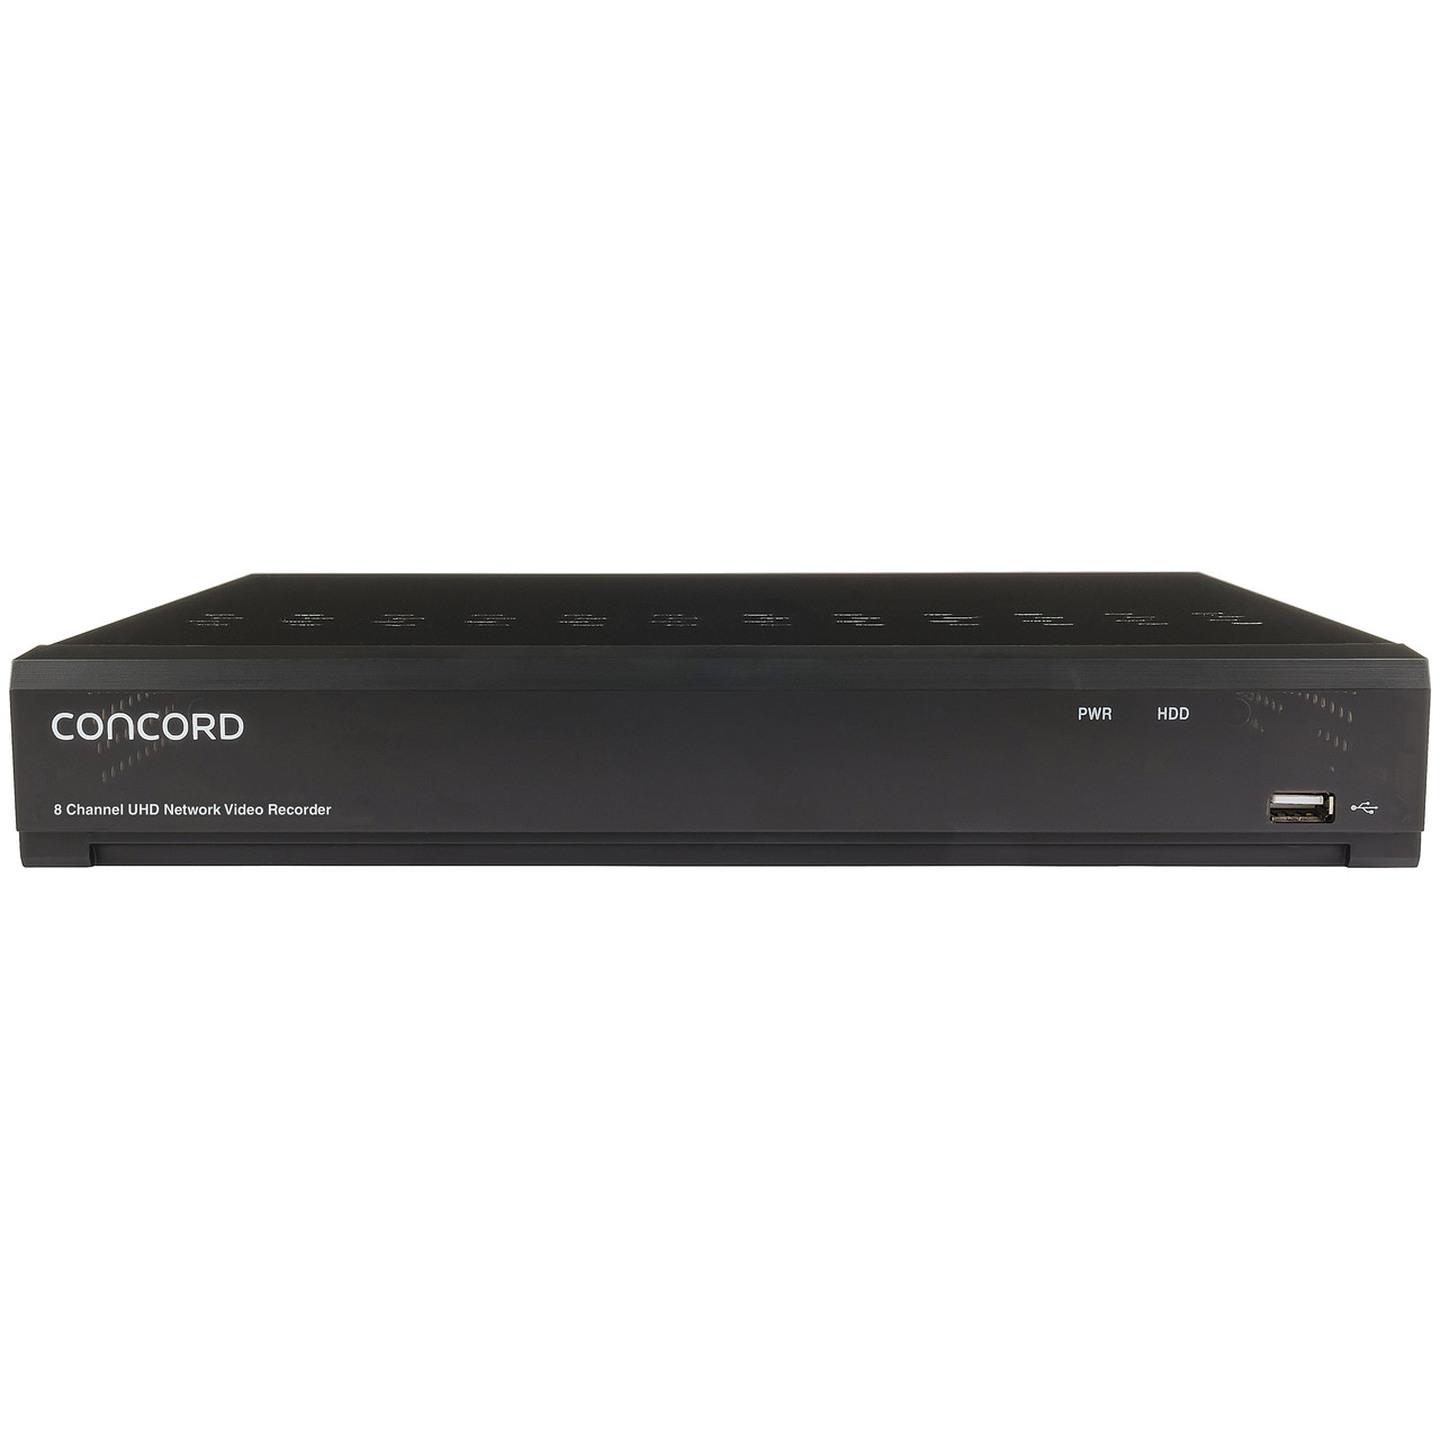 Concord 8 Channel 4K NVR Package - 4x4K Cameras